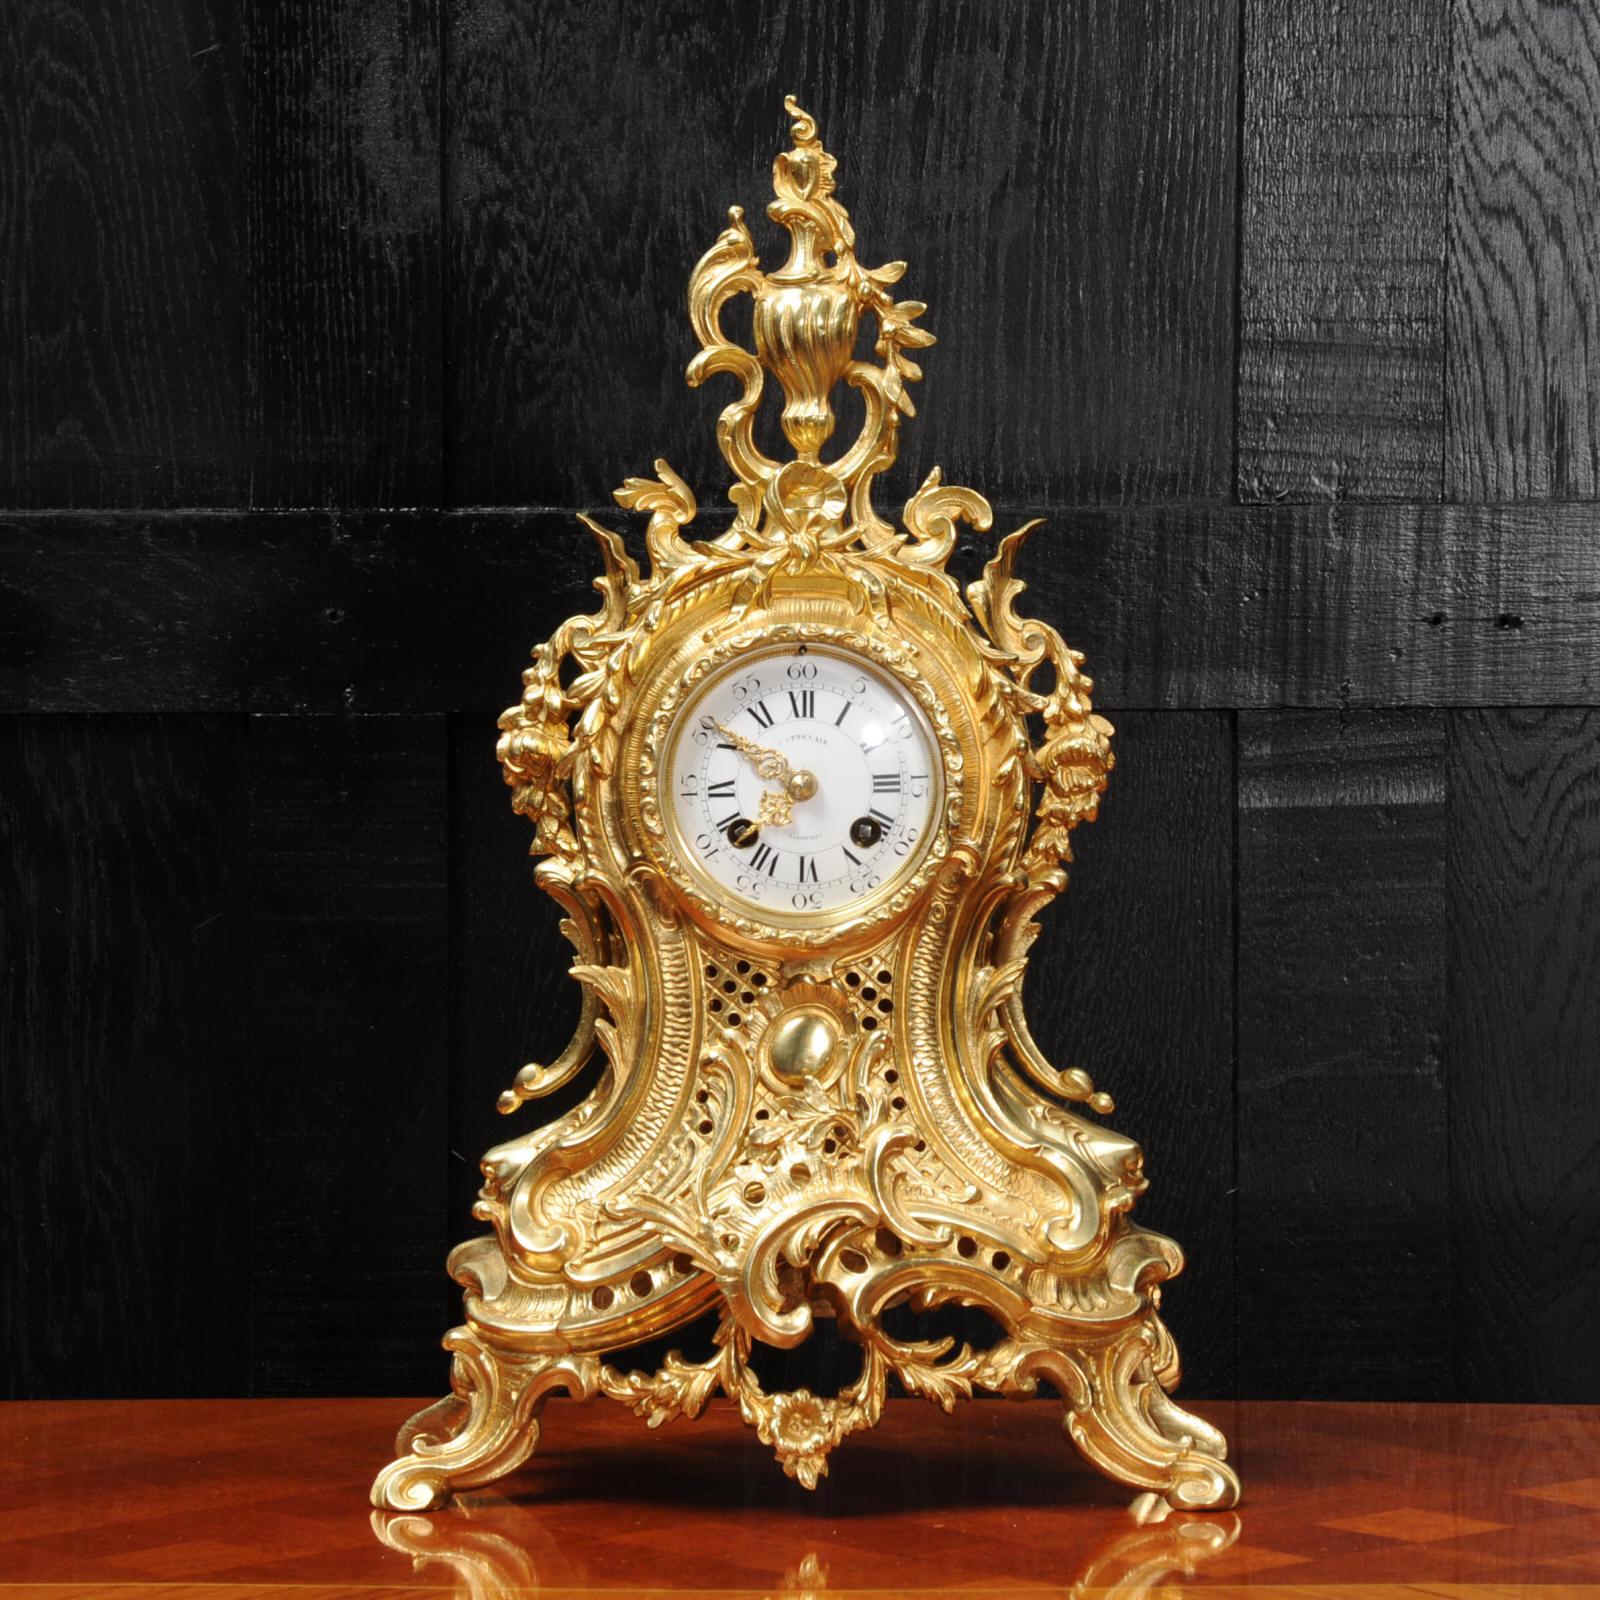 A lovely original antique French clock, boldly modelled in the Rococo style in gilded bronze, circa 1890, it is finely detailed with an elaborate asymmetric urn, profuse floral swags and 'C' scrolls. The front of the case is fretted, allowing a